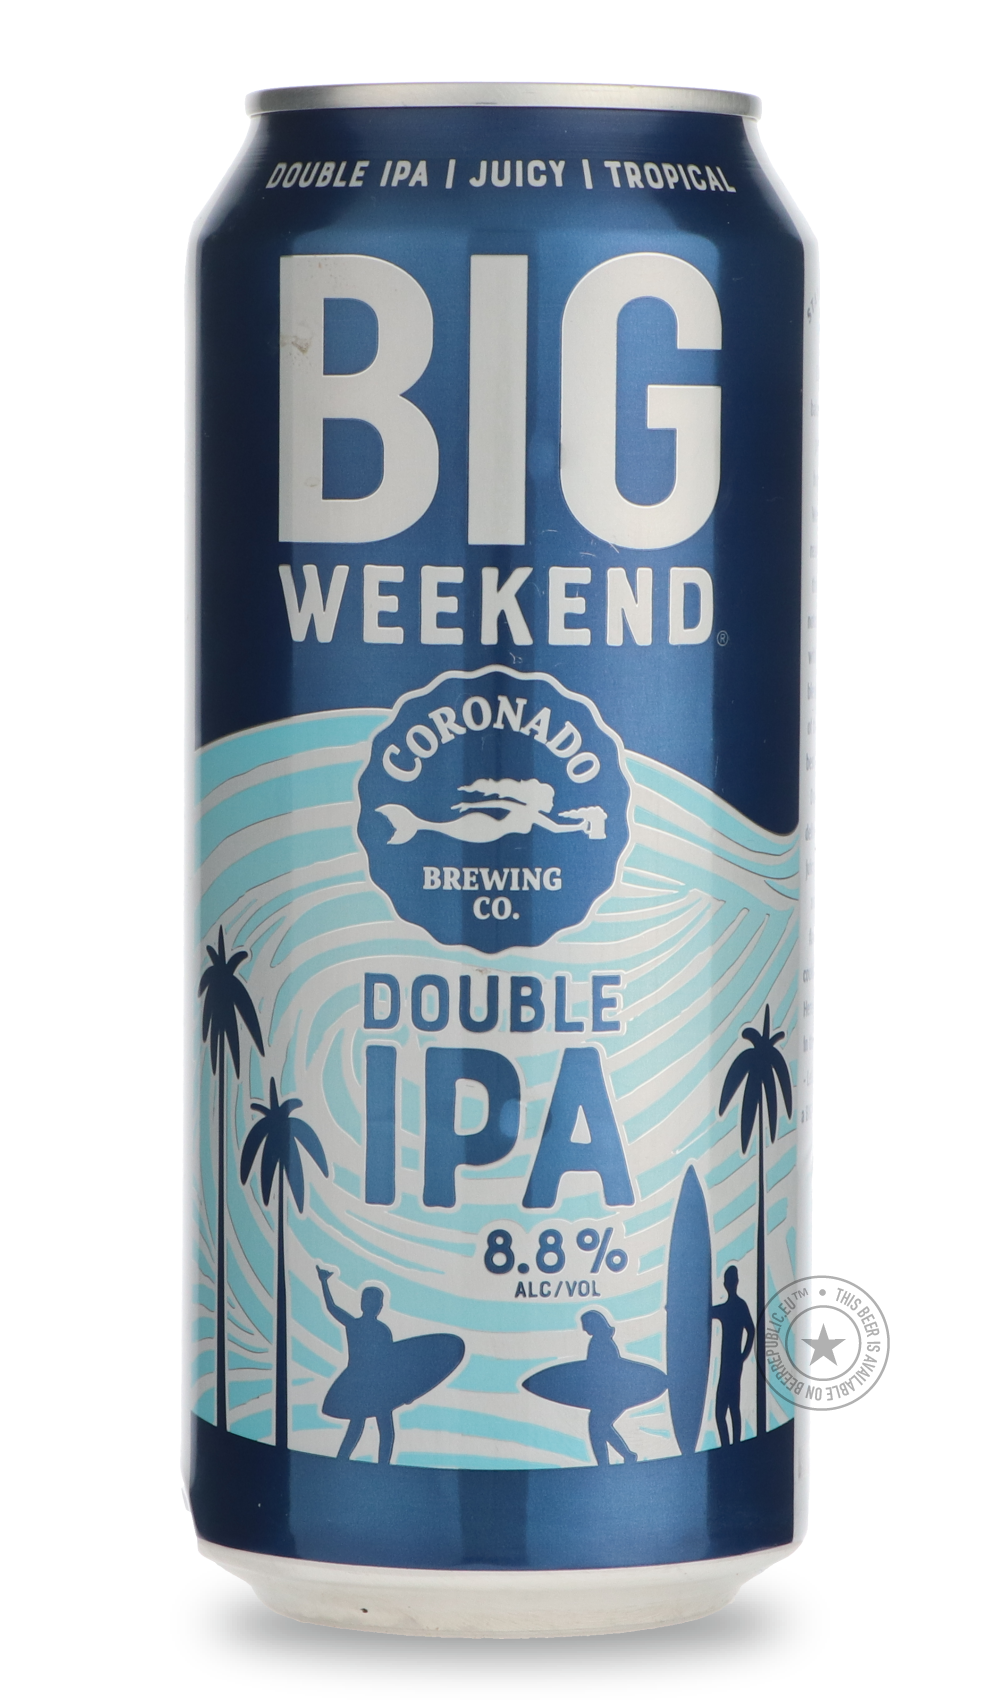 -Coronado- Big Weekend-IPA- Only @ Beer Republic - The best online beer store for American & Canadian craft beer - Buy beer online from the USA and Canada - Bier online kopen - Amerikaans bier kopen - Craft beer store - Craft beer kopen - Amerikanisch bier kaufen - Bier online kaufen - Acheter biere online - IPA - Stout - Porter - New England IPA - Hazy IPA - Imperial Stout - Barrel Aged - Barrel Aged Imperial Stout - Brown - Dark beer - Blond - Blonde - Pilsner - Lager - Wheat - Weizen - Amber - Barley Win